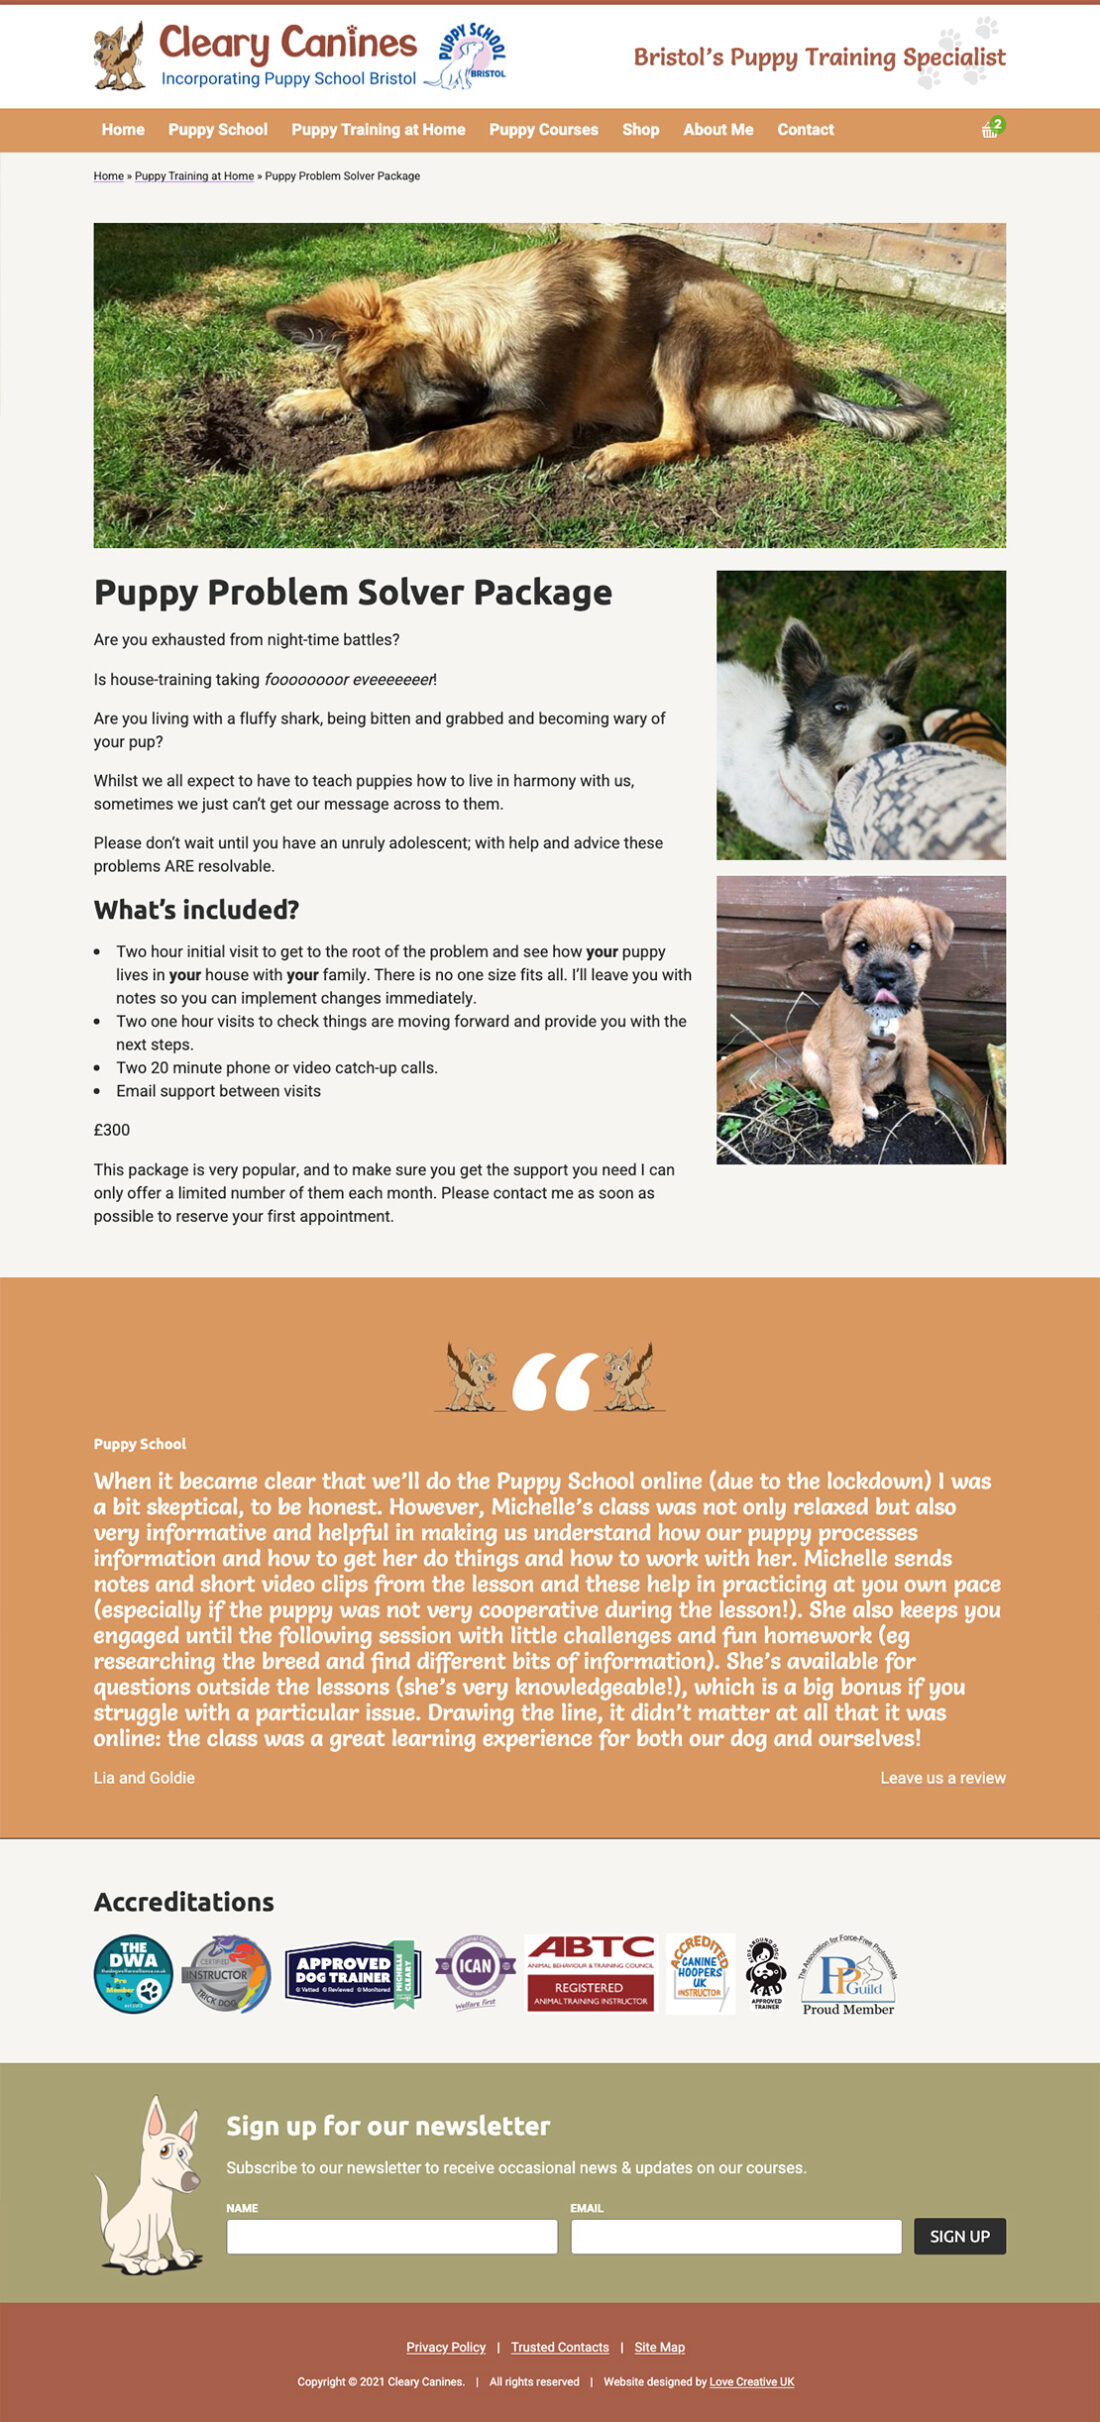 Cleary Canines Puppy Training course page